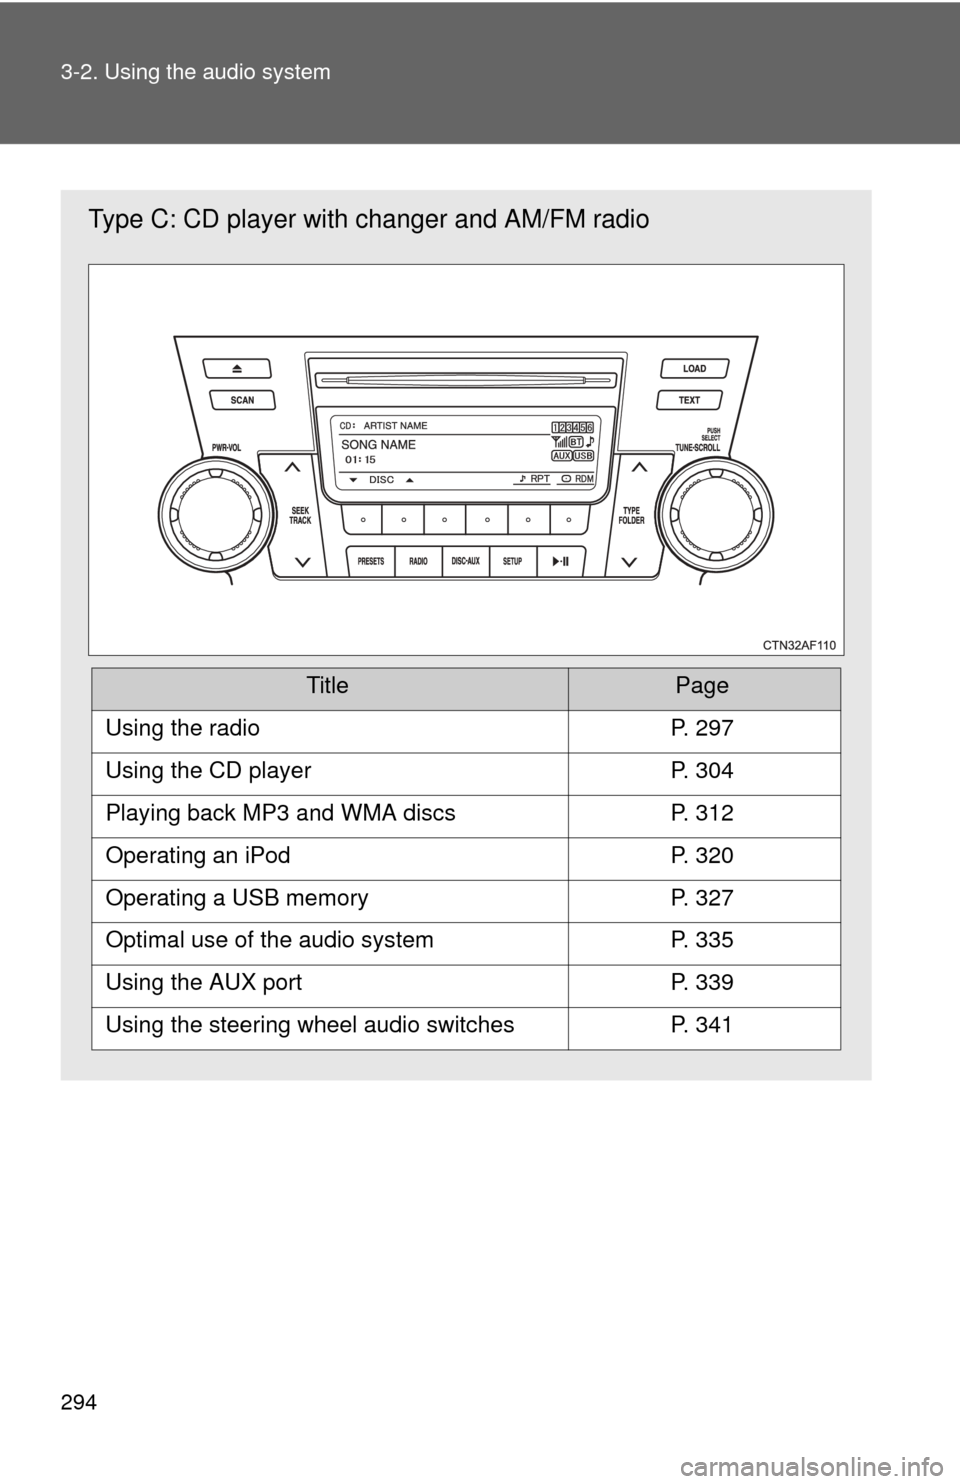 TOYOTA HIGHLANDER 2012 XU40 / 2.G Owners Manual 294 3-2. Using the audio system
Type C: CD player with changer and AM/FM radio
TitlePage
Using the radioP. 297
Using the CD playerP. 304
Playing back MP3 and WMA discsP. 312
Operating an iPodP. 320
Op